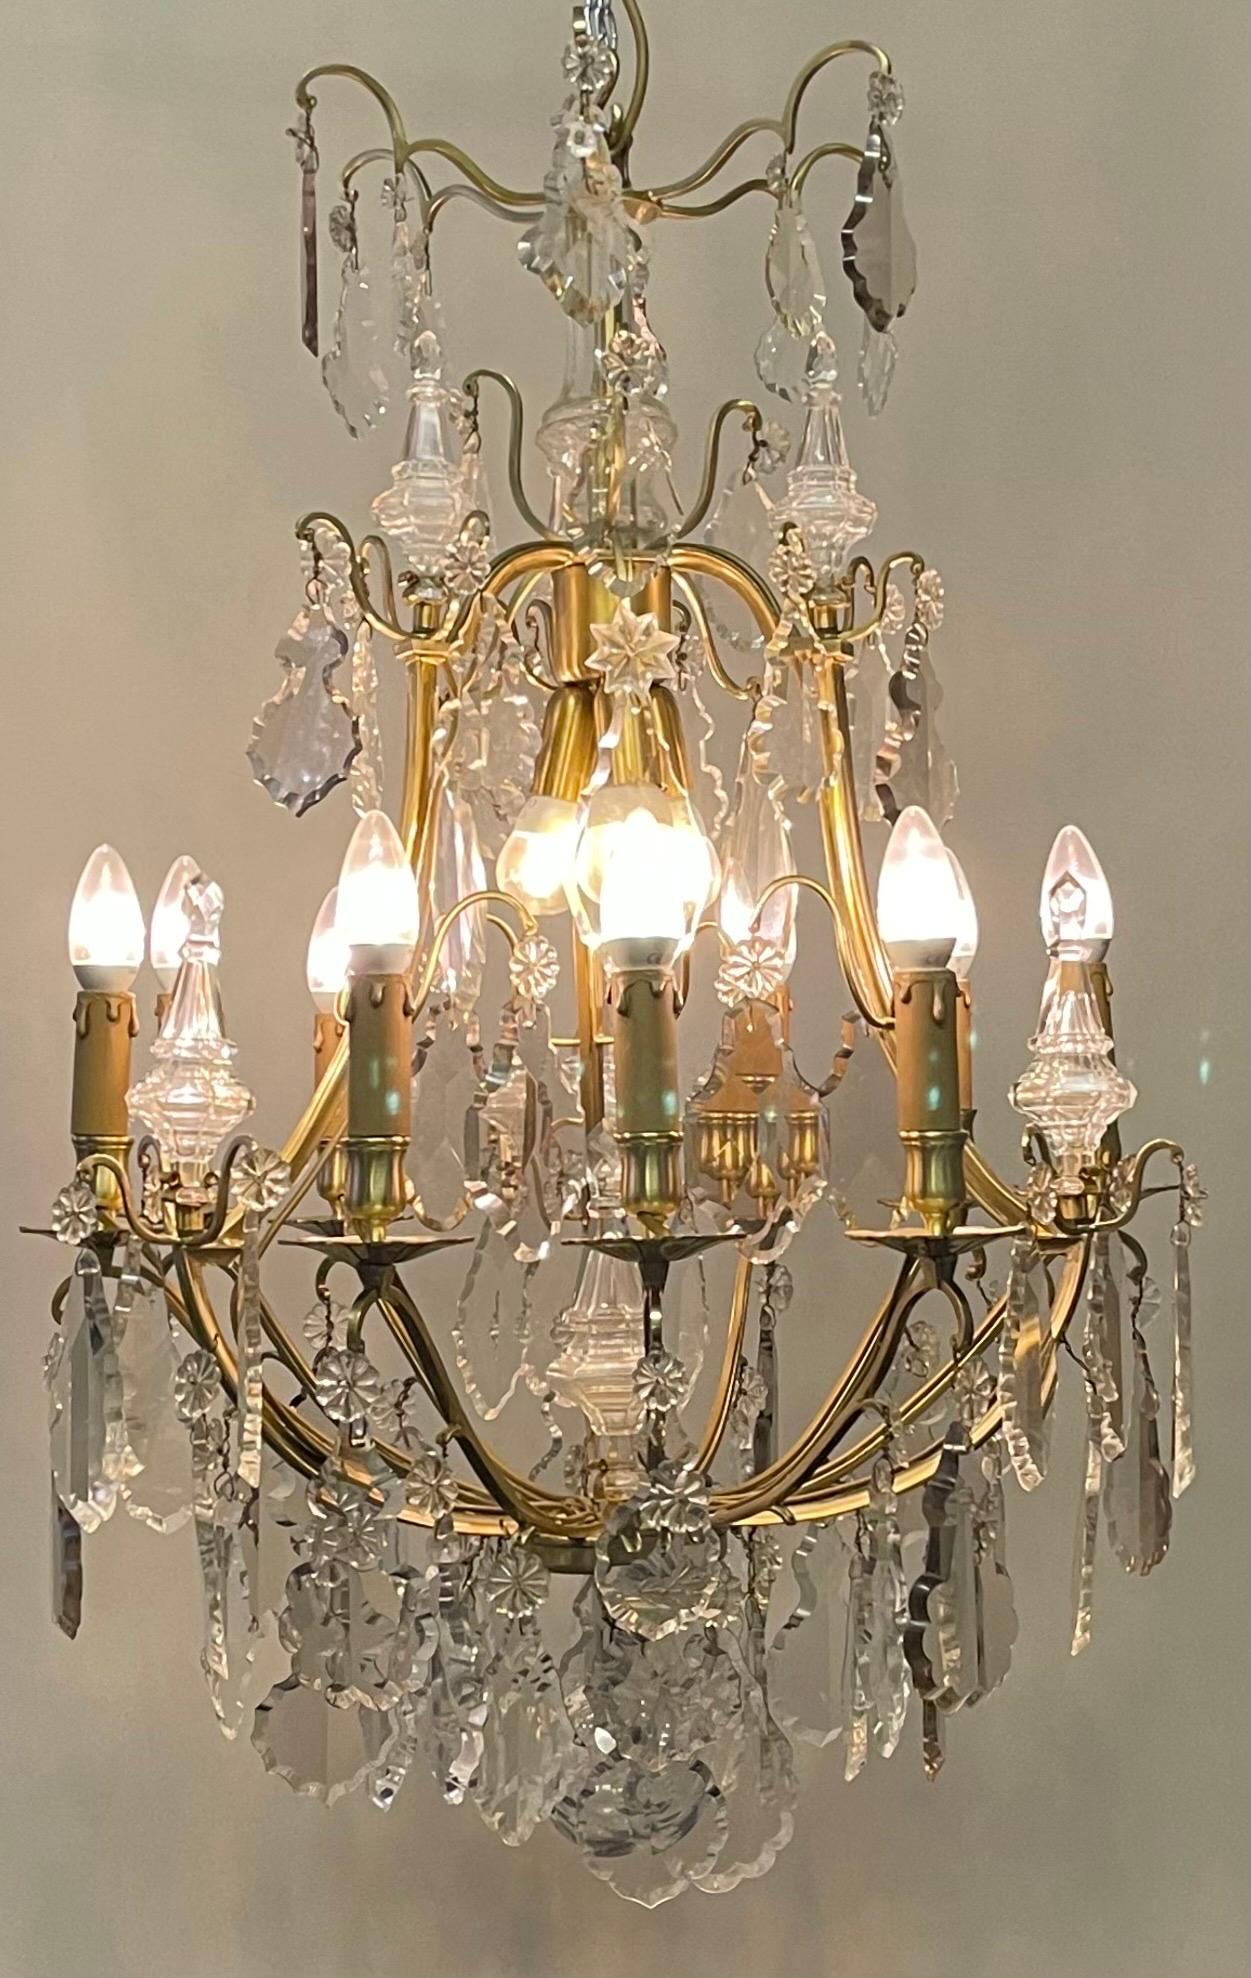 A wonderful high quality Louis XV gilt bronze and cut- crystal chandelier, France, 1840-1880s.
This beautiful chandelier is made of gilt bronze suspended with big crystal prism in three different colors ( amethyst, smoke and clear).
Fully restored